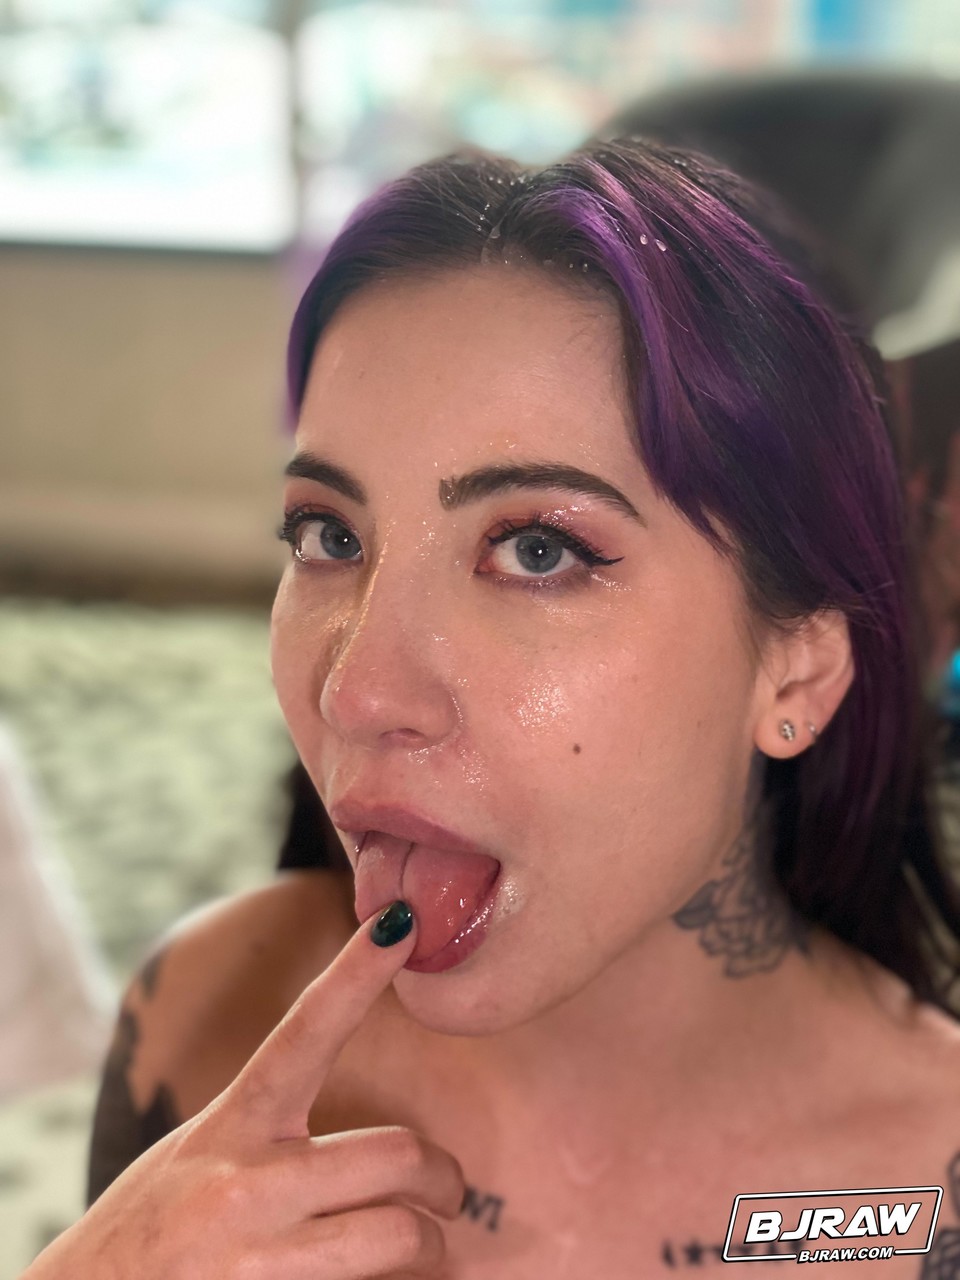 Brunette babe with tattoos Charlotte Sartre takes a dick in her mouth foto porno #424561435 | BJ Raw Pics, Charlotte Sartre, Tattoo, porno móvil